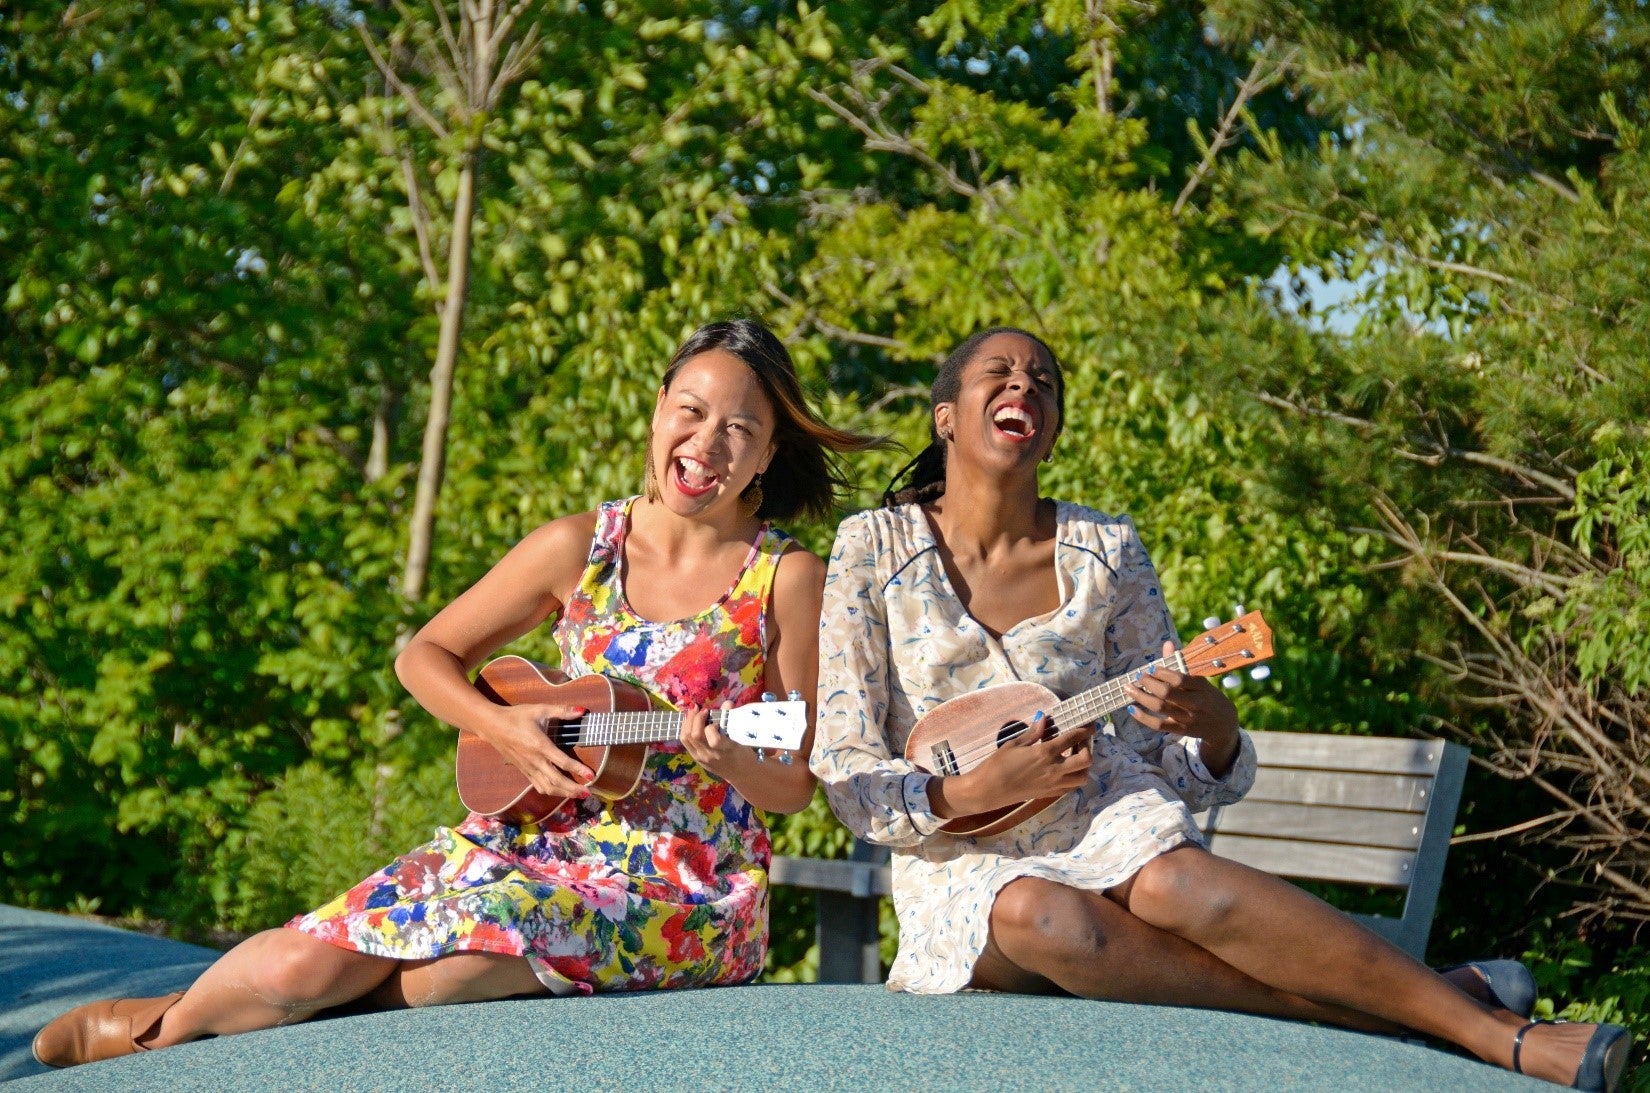 Image of K Funk and Lady Ree playing ukuleles at Corktown Common.